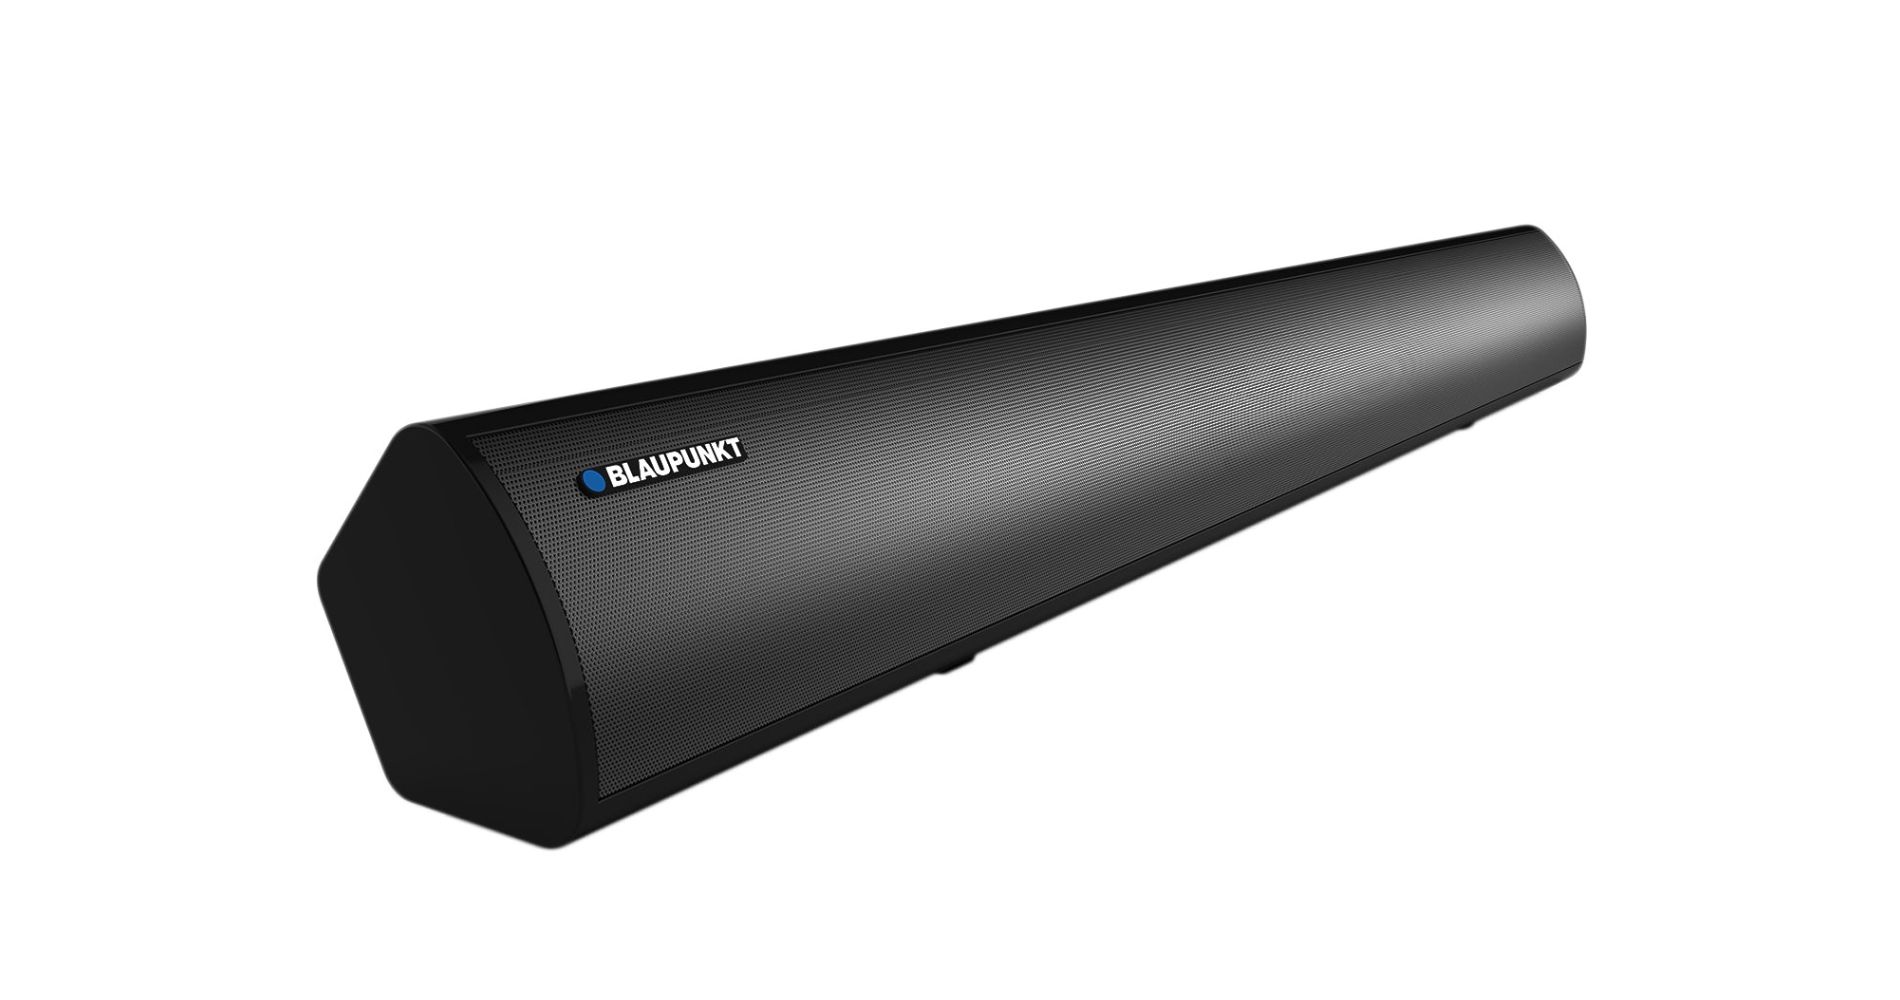 Blaupunkt Makes A Massive Leap In Acoustics Technology With The